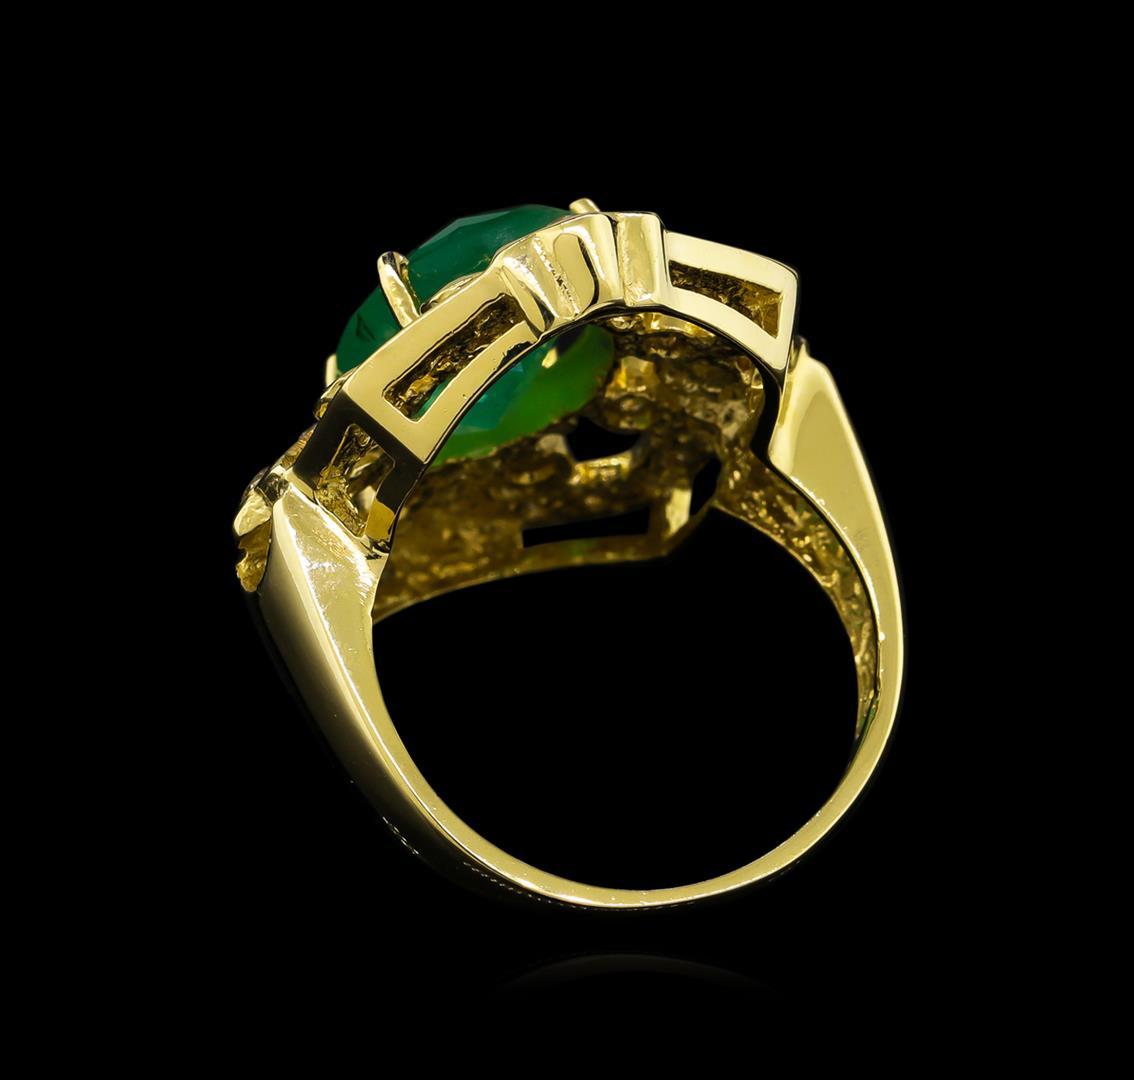 14KT Yellow Gold 3.73 ctw Emerald and Diamond Ring